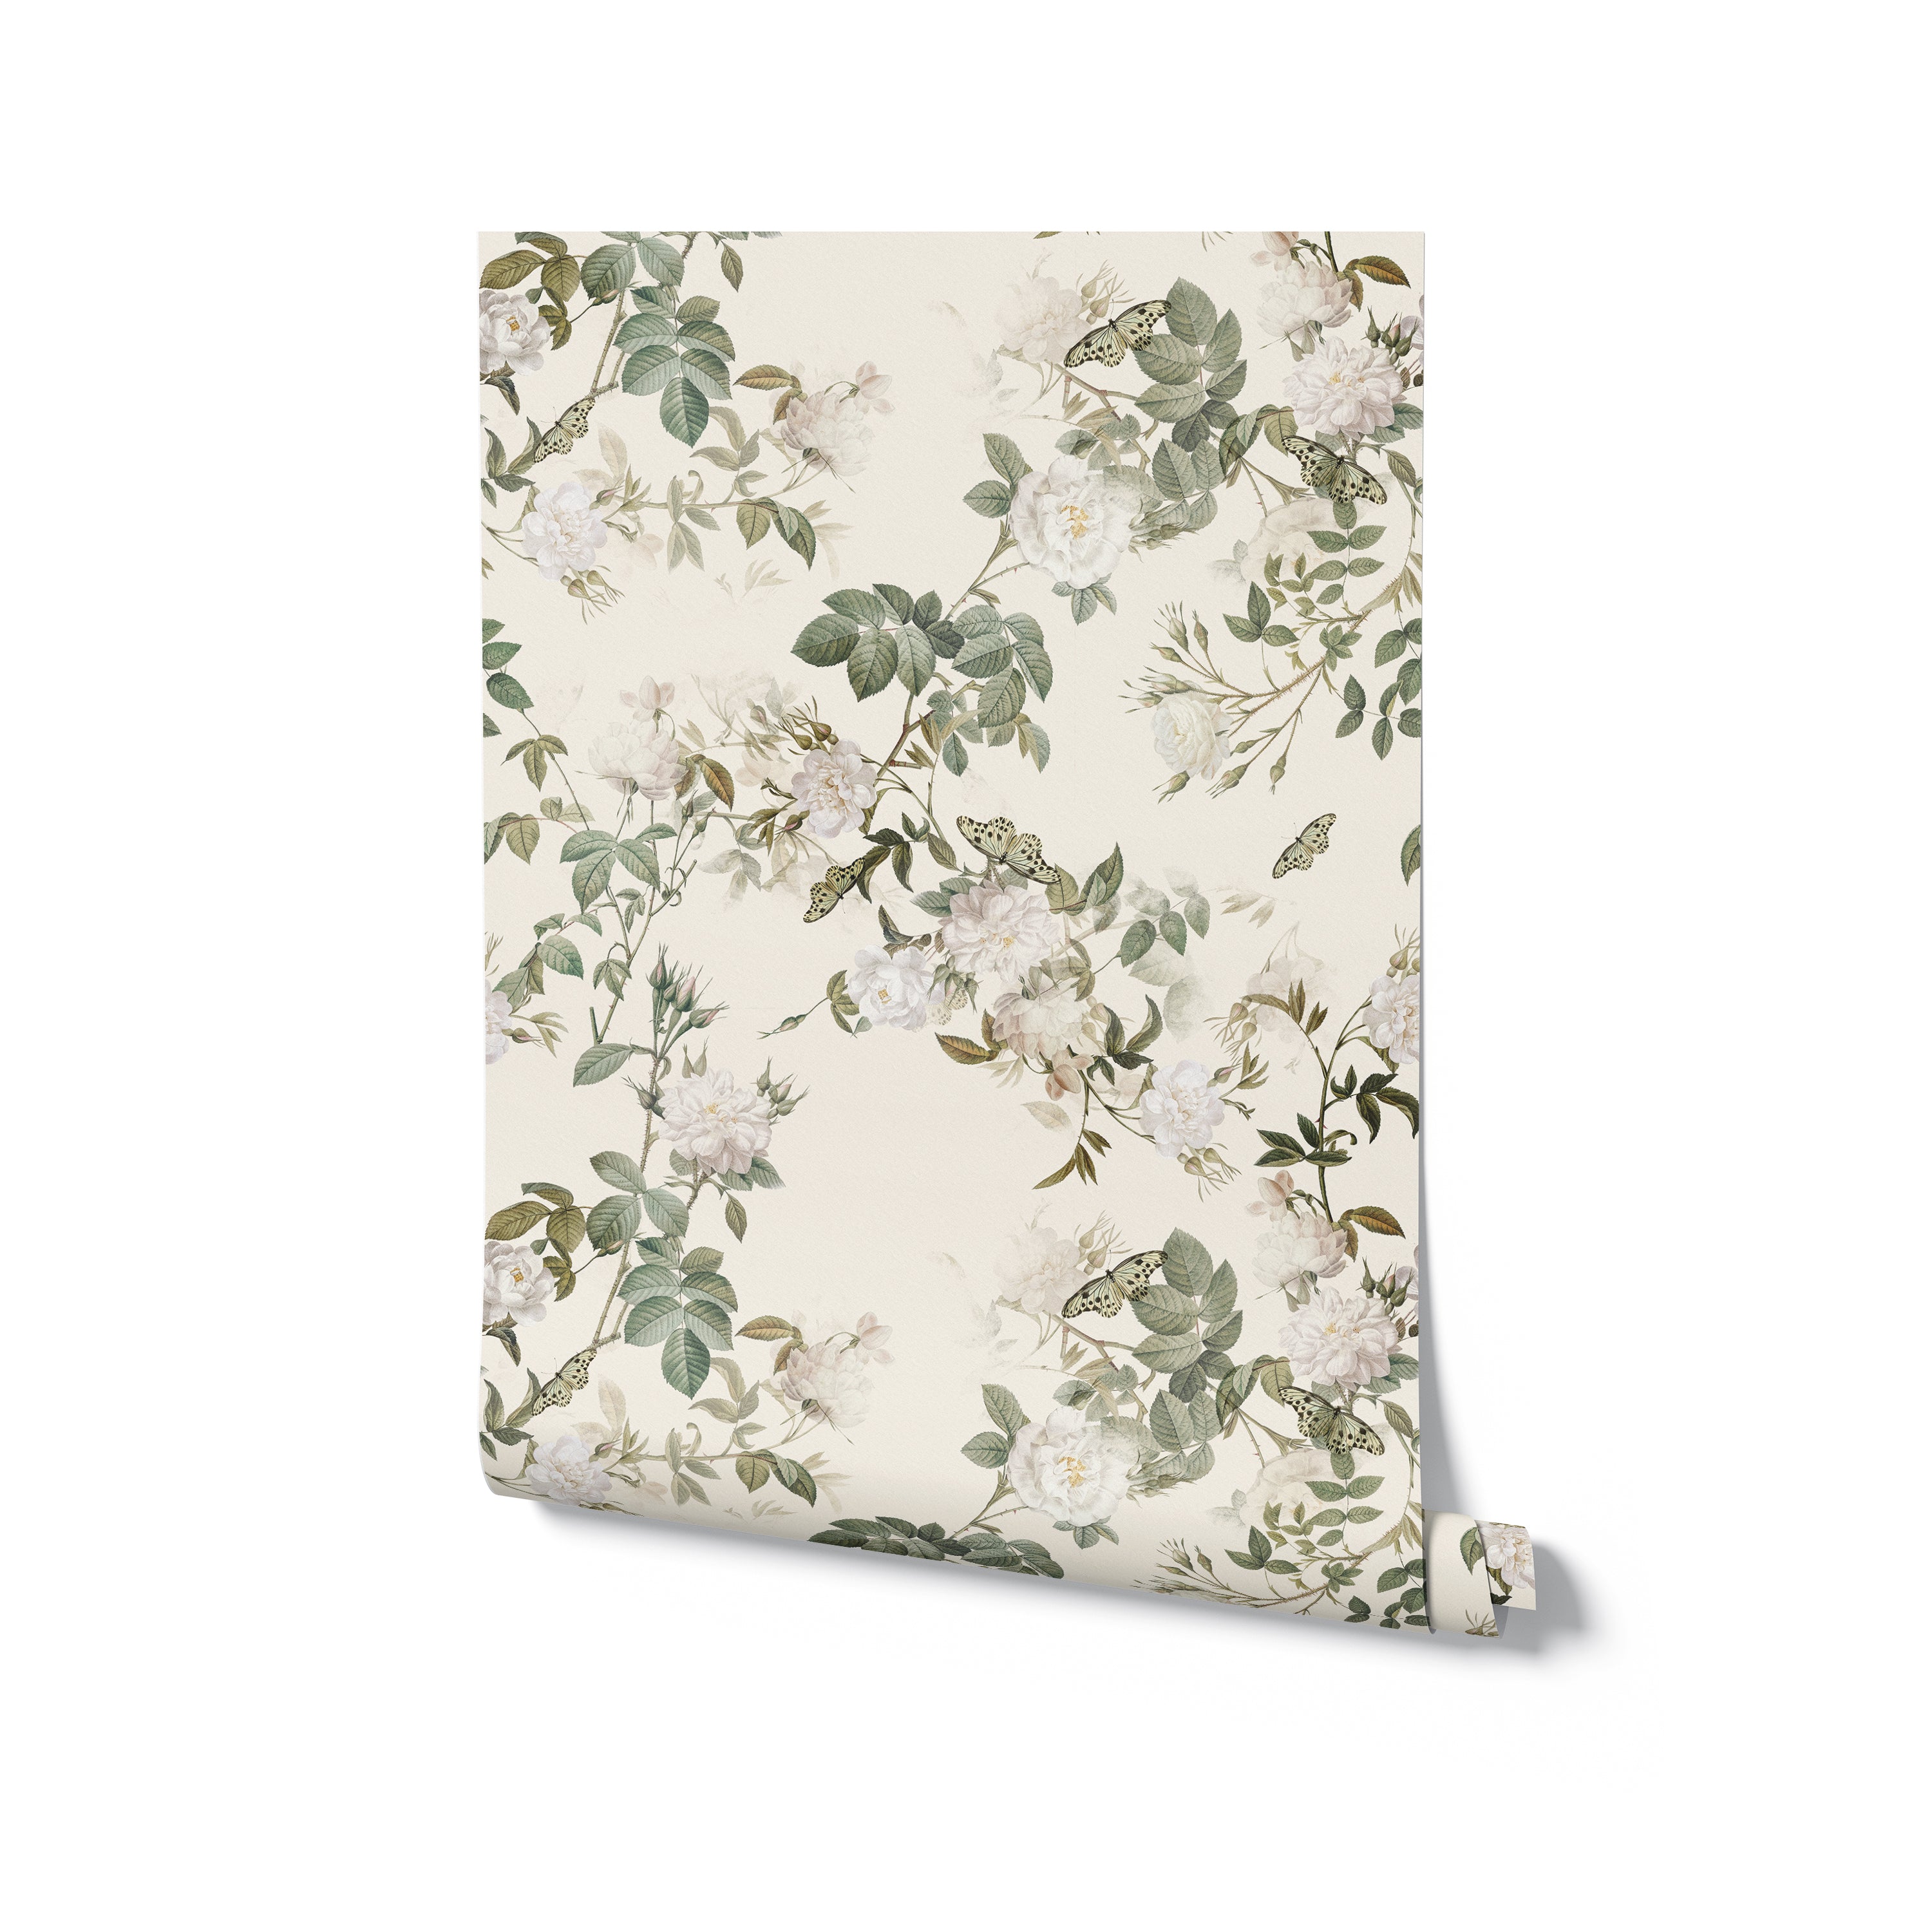 A roll of luxury wallpaper with a pastel mint floral pattern, presenting large leaves and flowers with butterflies, on a neutral background